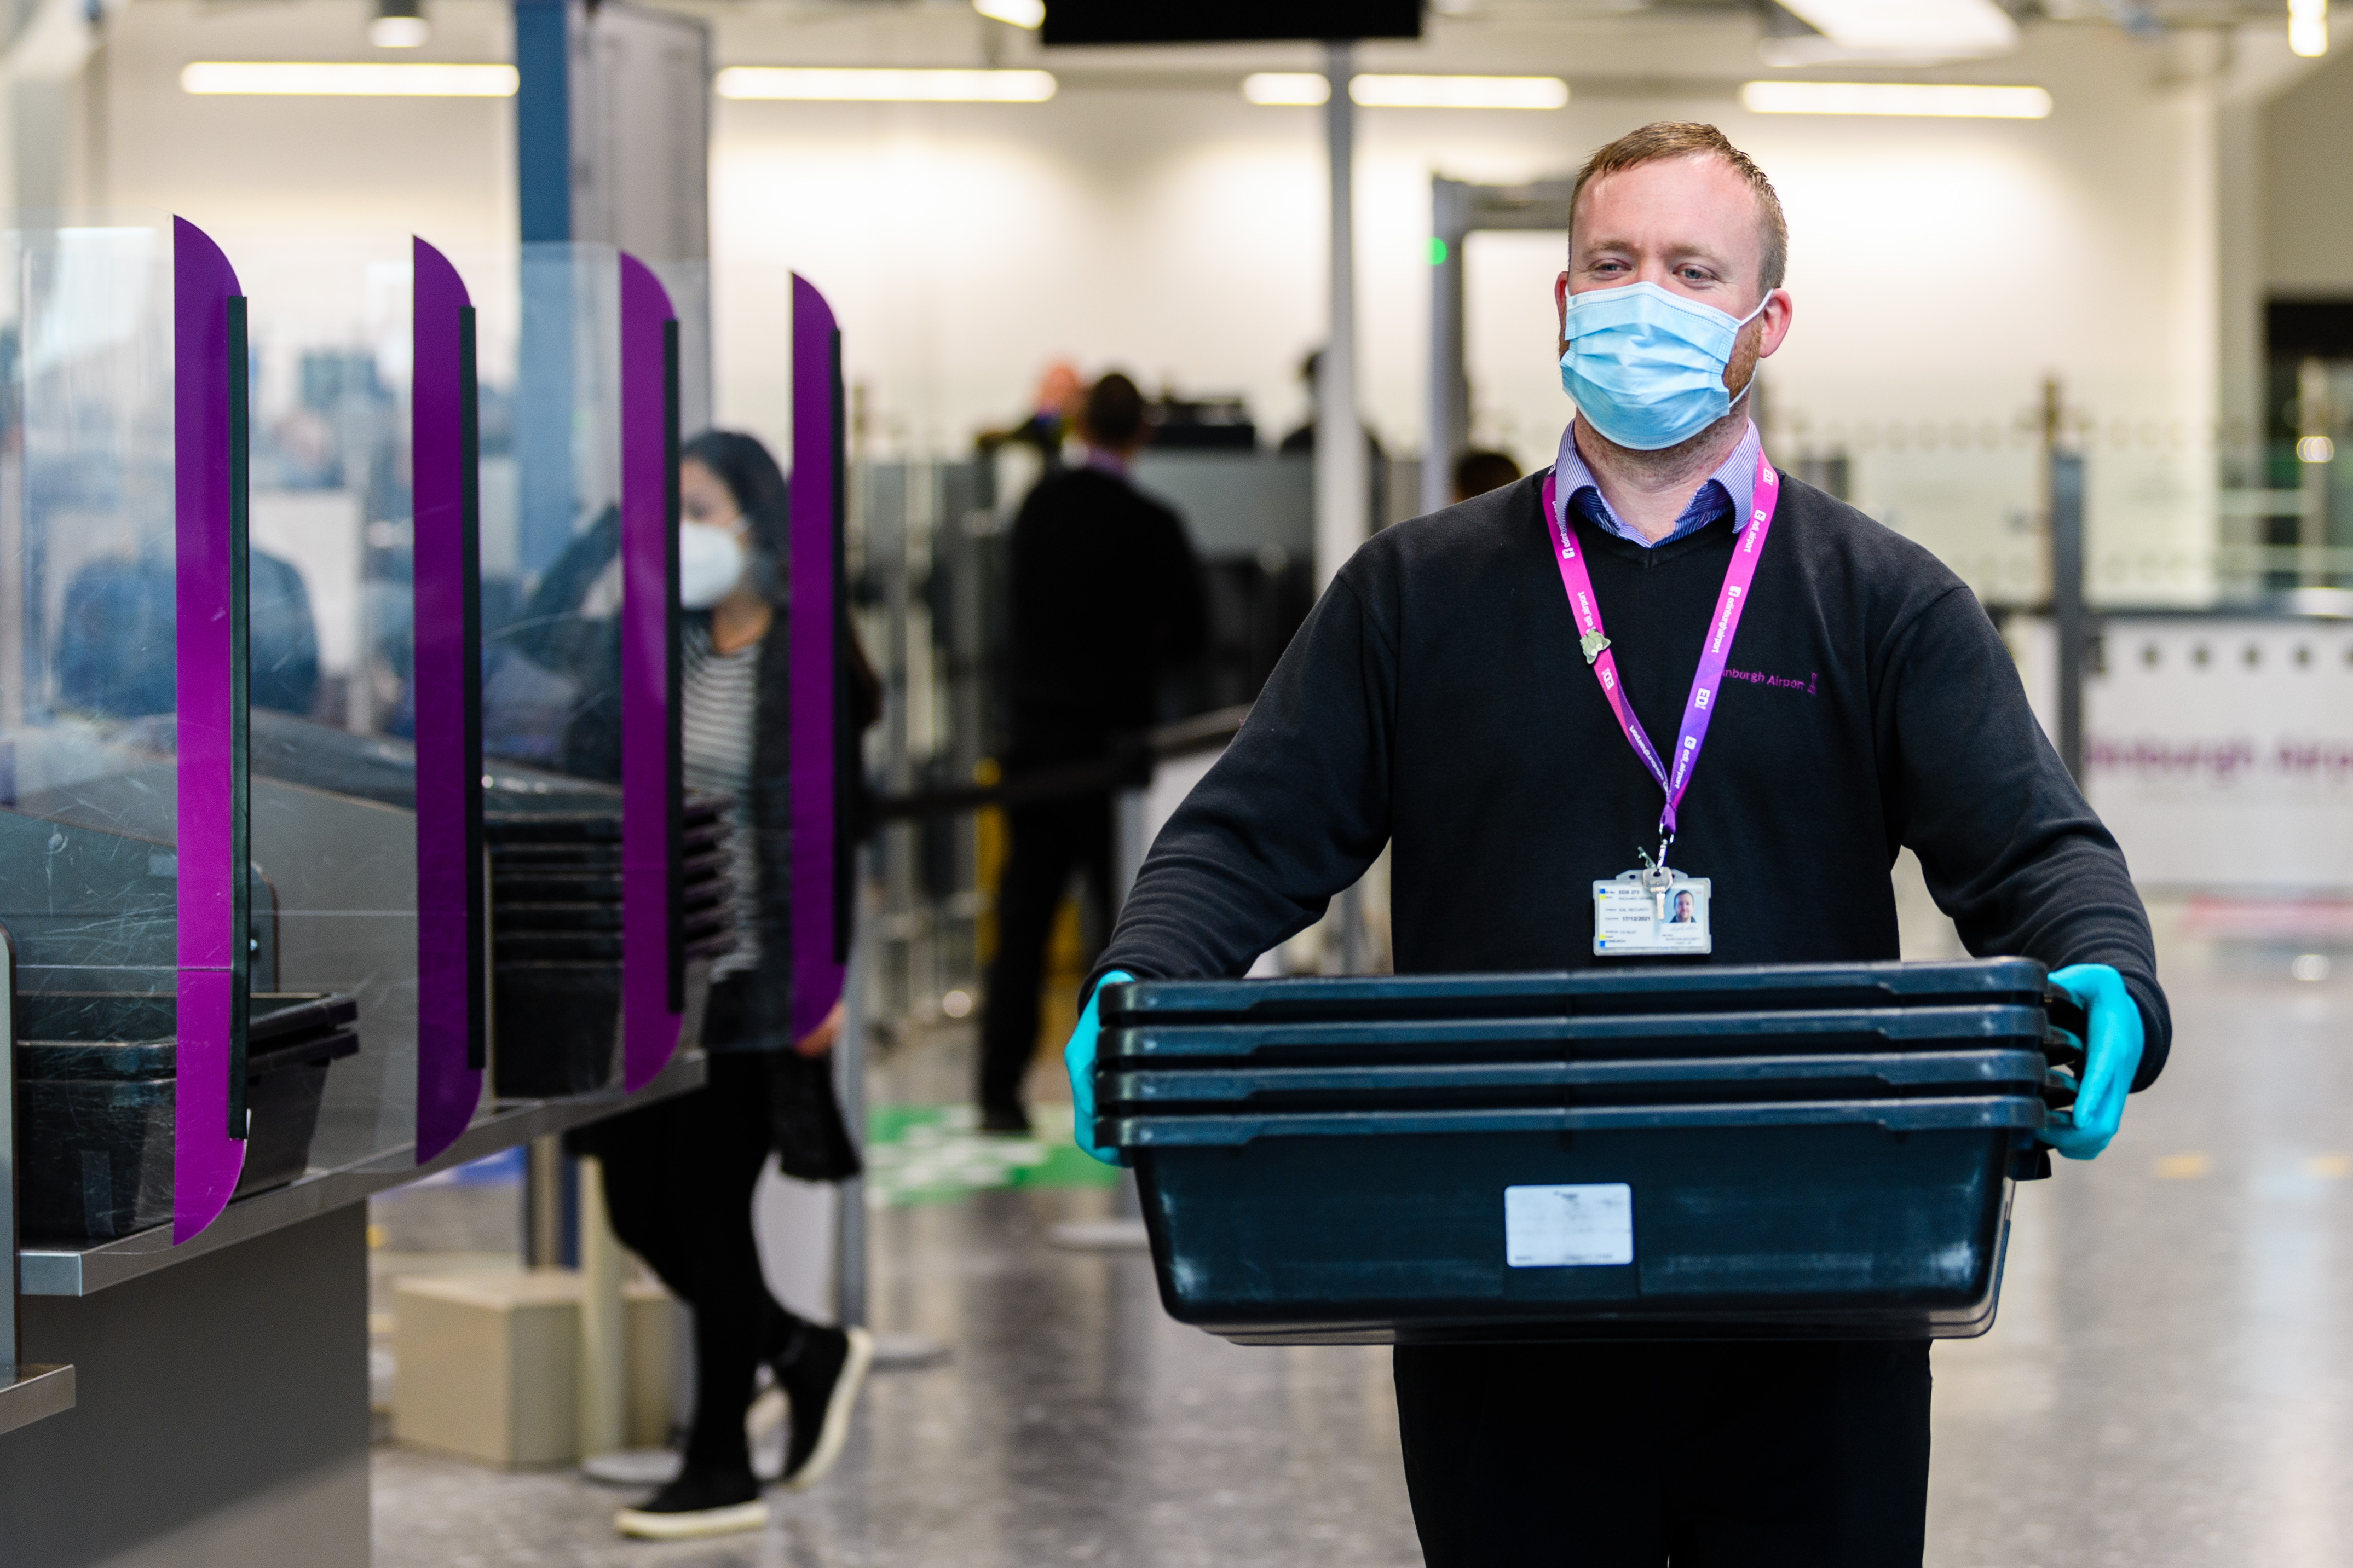 Learn all about Edinburgh Airport career opportunities at upcoming recruitment day